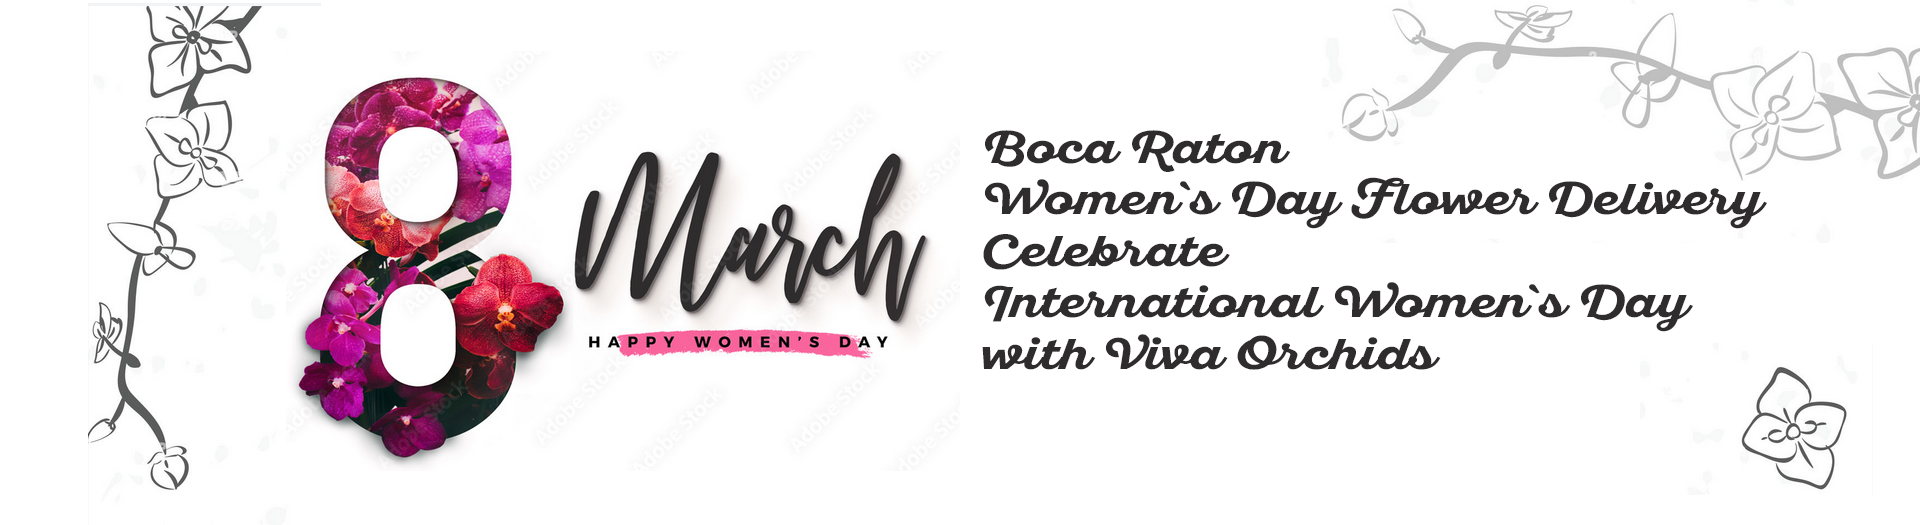 Boca Raton Women's Day Flower Delivery - Celebrate International Women's Day with Orchids!